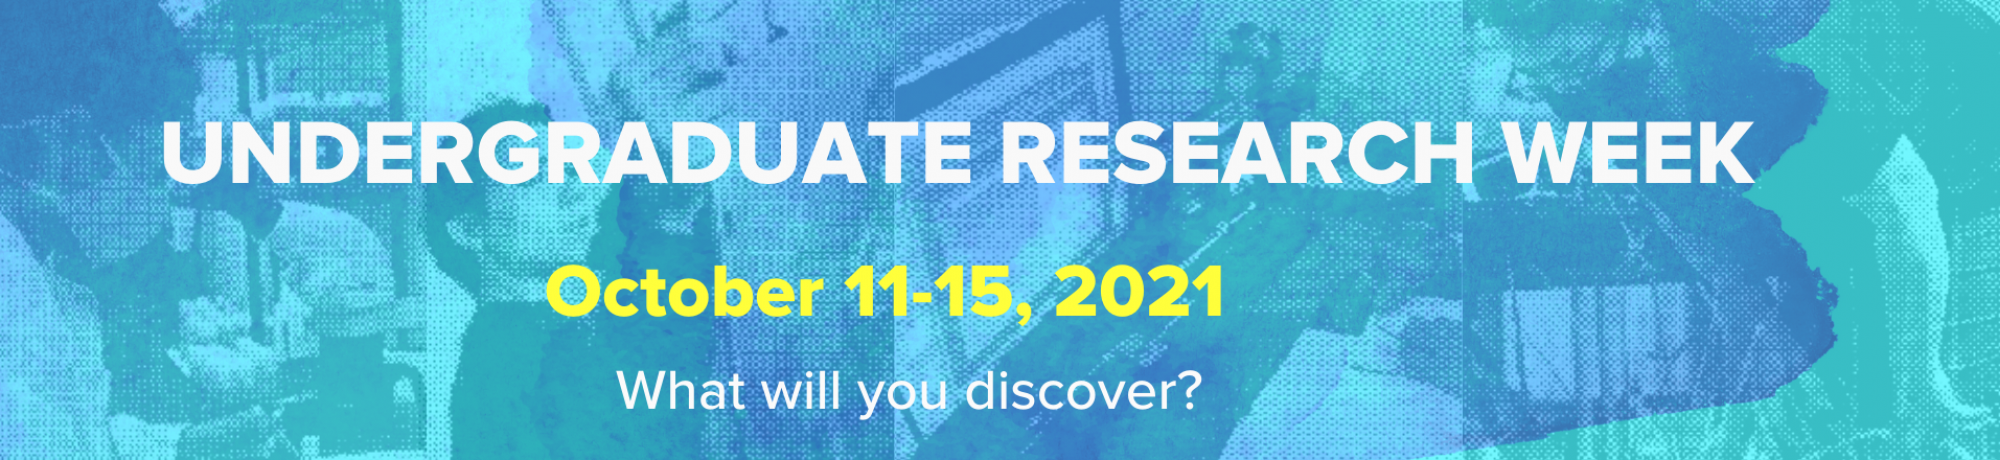 Undergraduate Research Week, October 11-15. What will you discover?